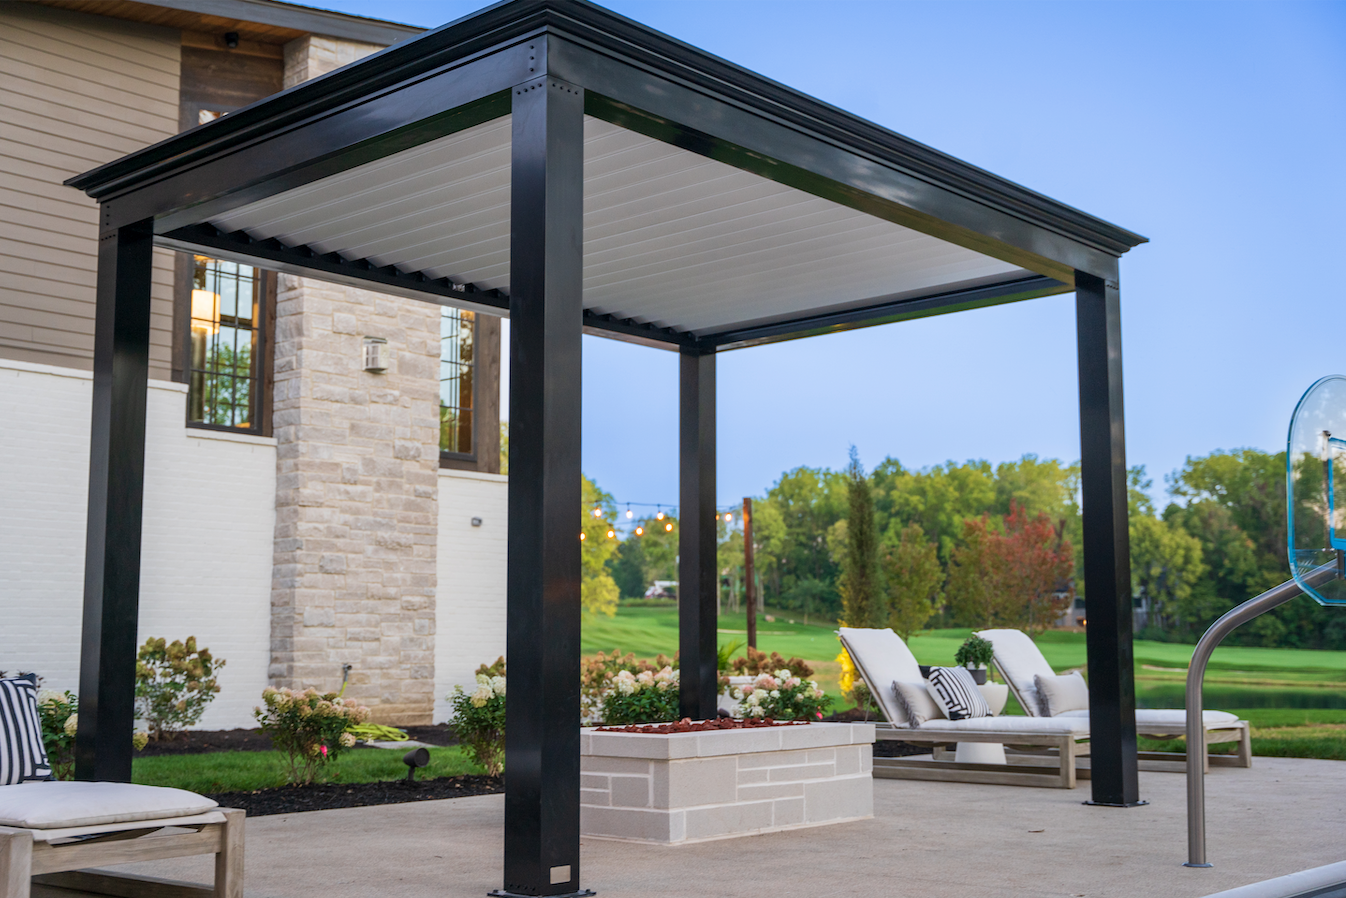 Patio area with a pergola in an outdoor living space.  Outdoor lifestyle at its best!